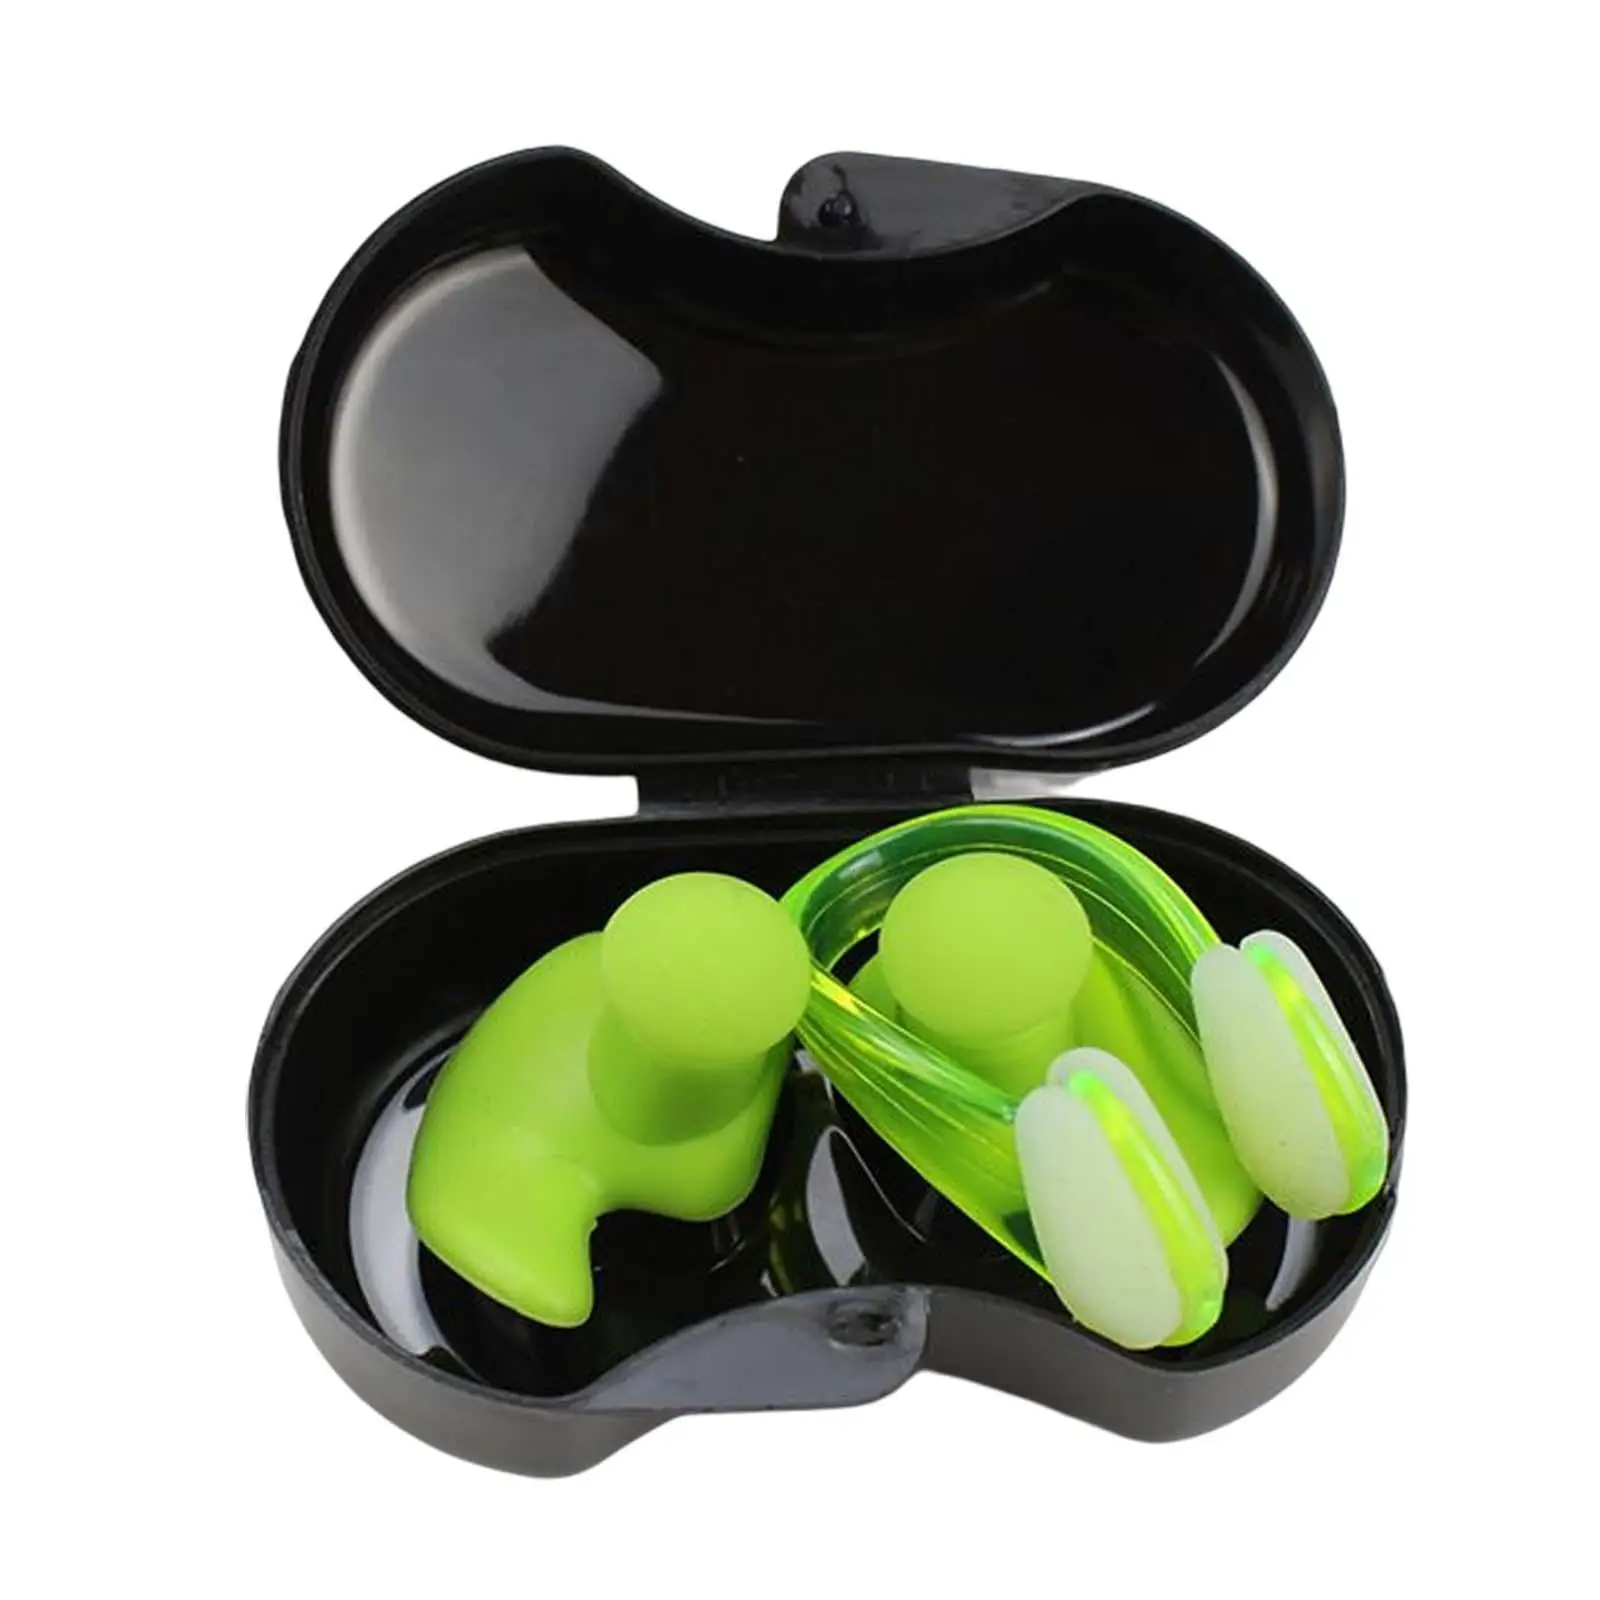 Swimming Ear Plug and Nose Clip Set Silicone Swimming Earplugs Ear Nose Protector for Water Sports